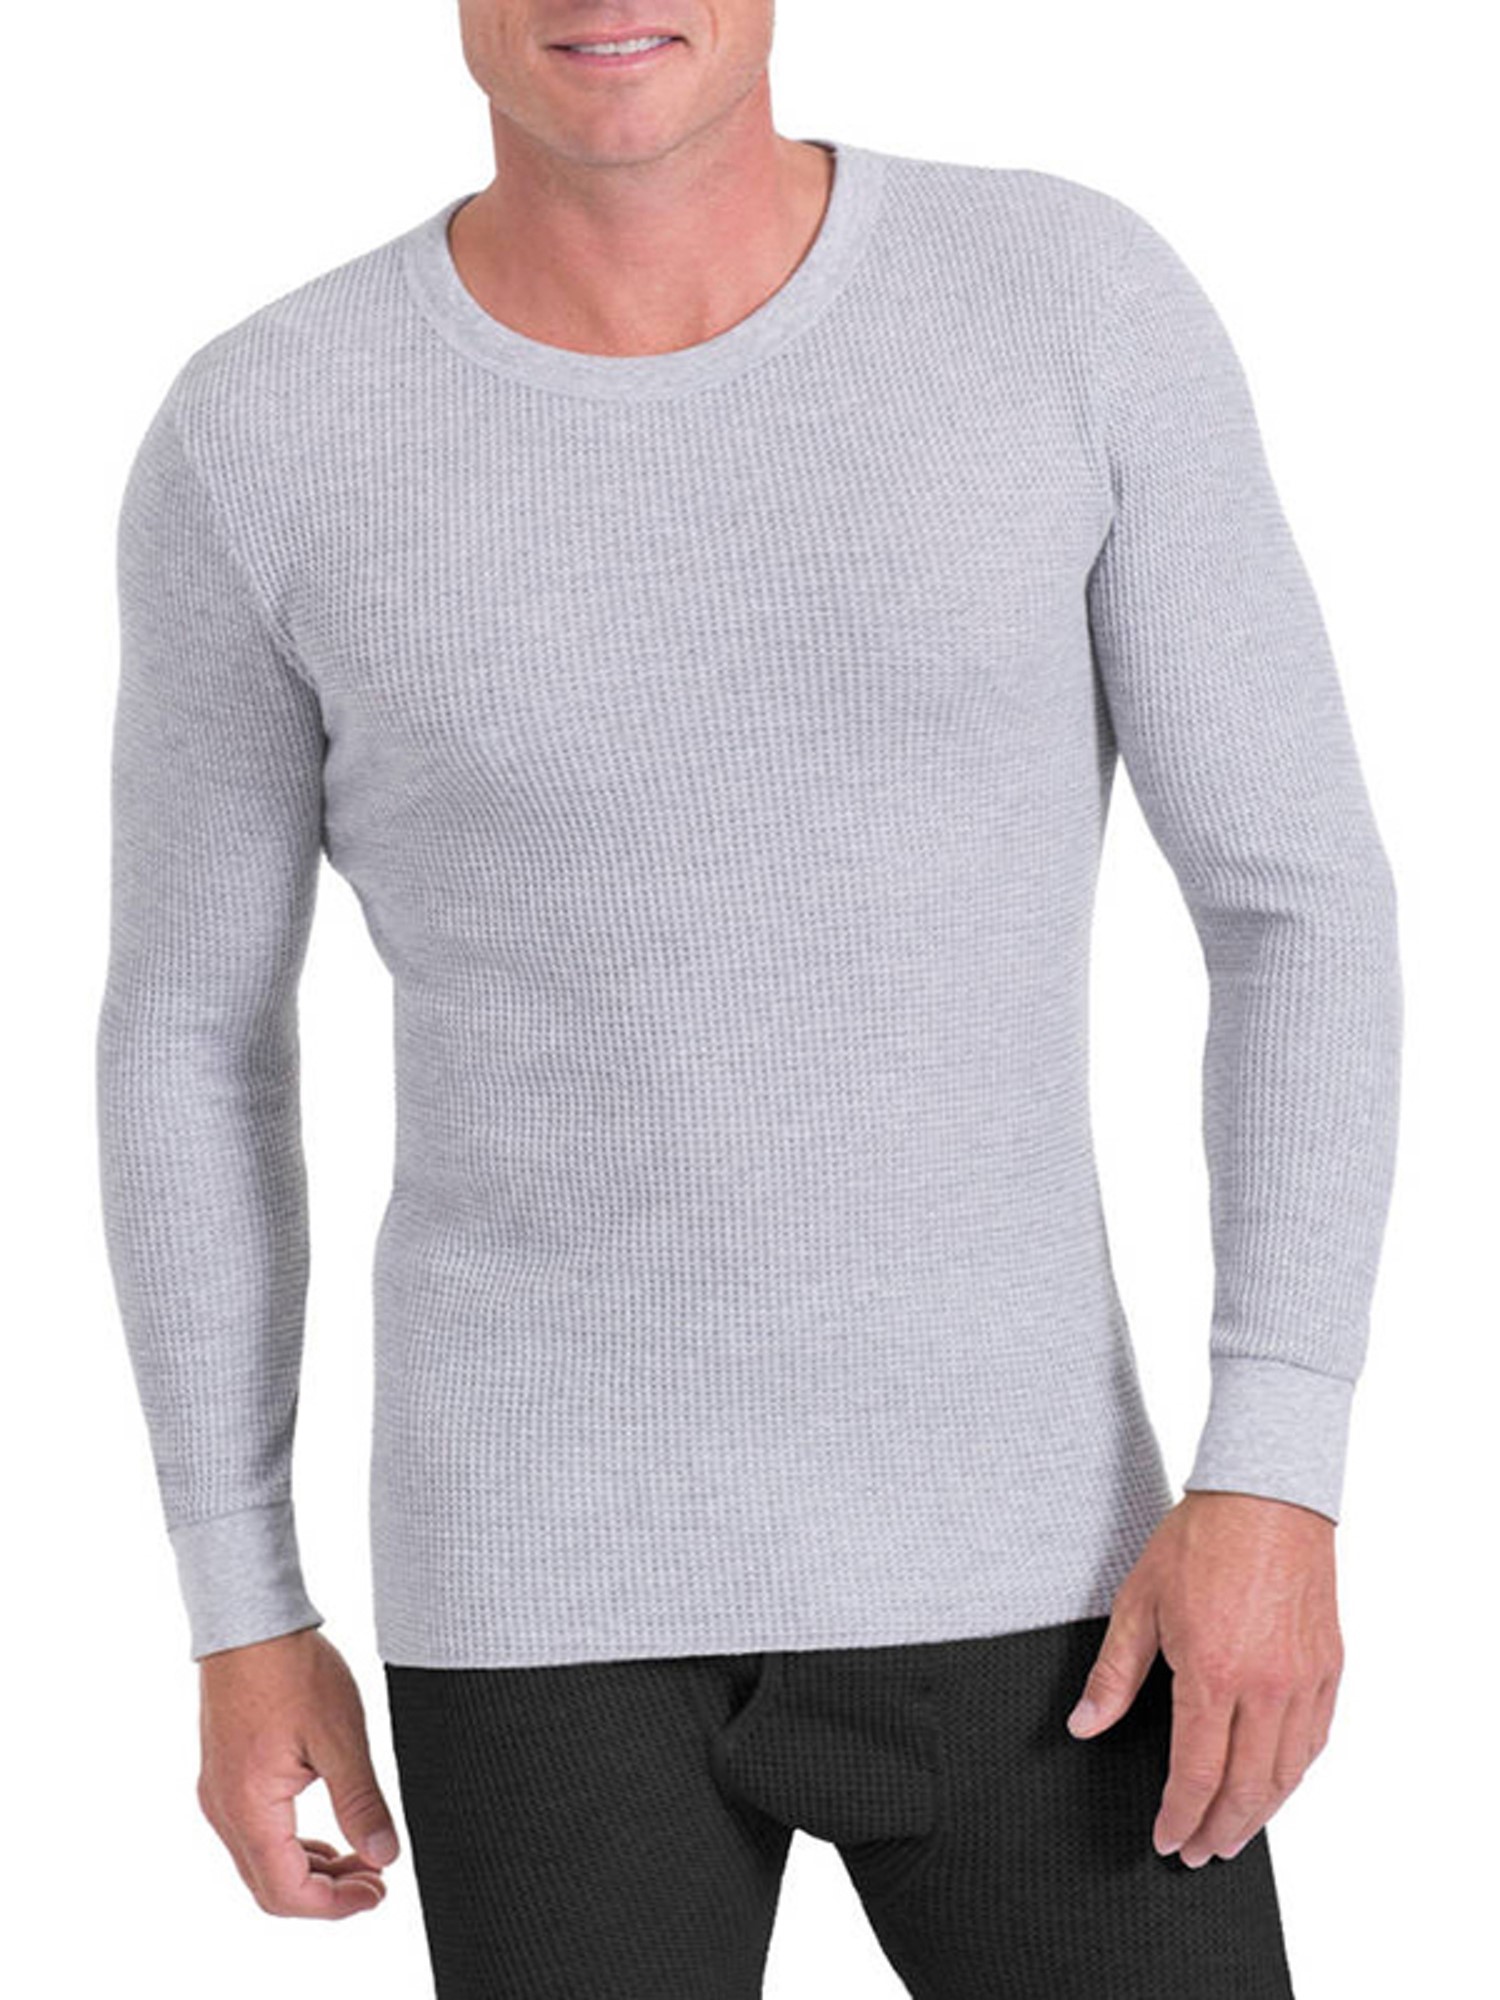 fruit of the loom men's classic midweight waffle thermal underwear crew top (1 & 2 packs), light grey heather, small - image 1 of 4